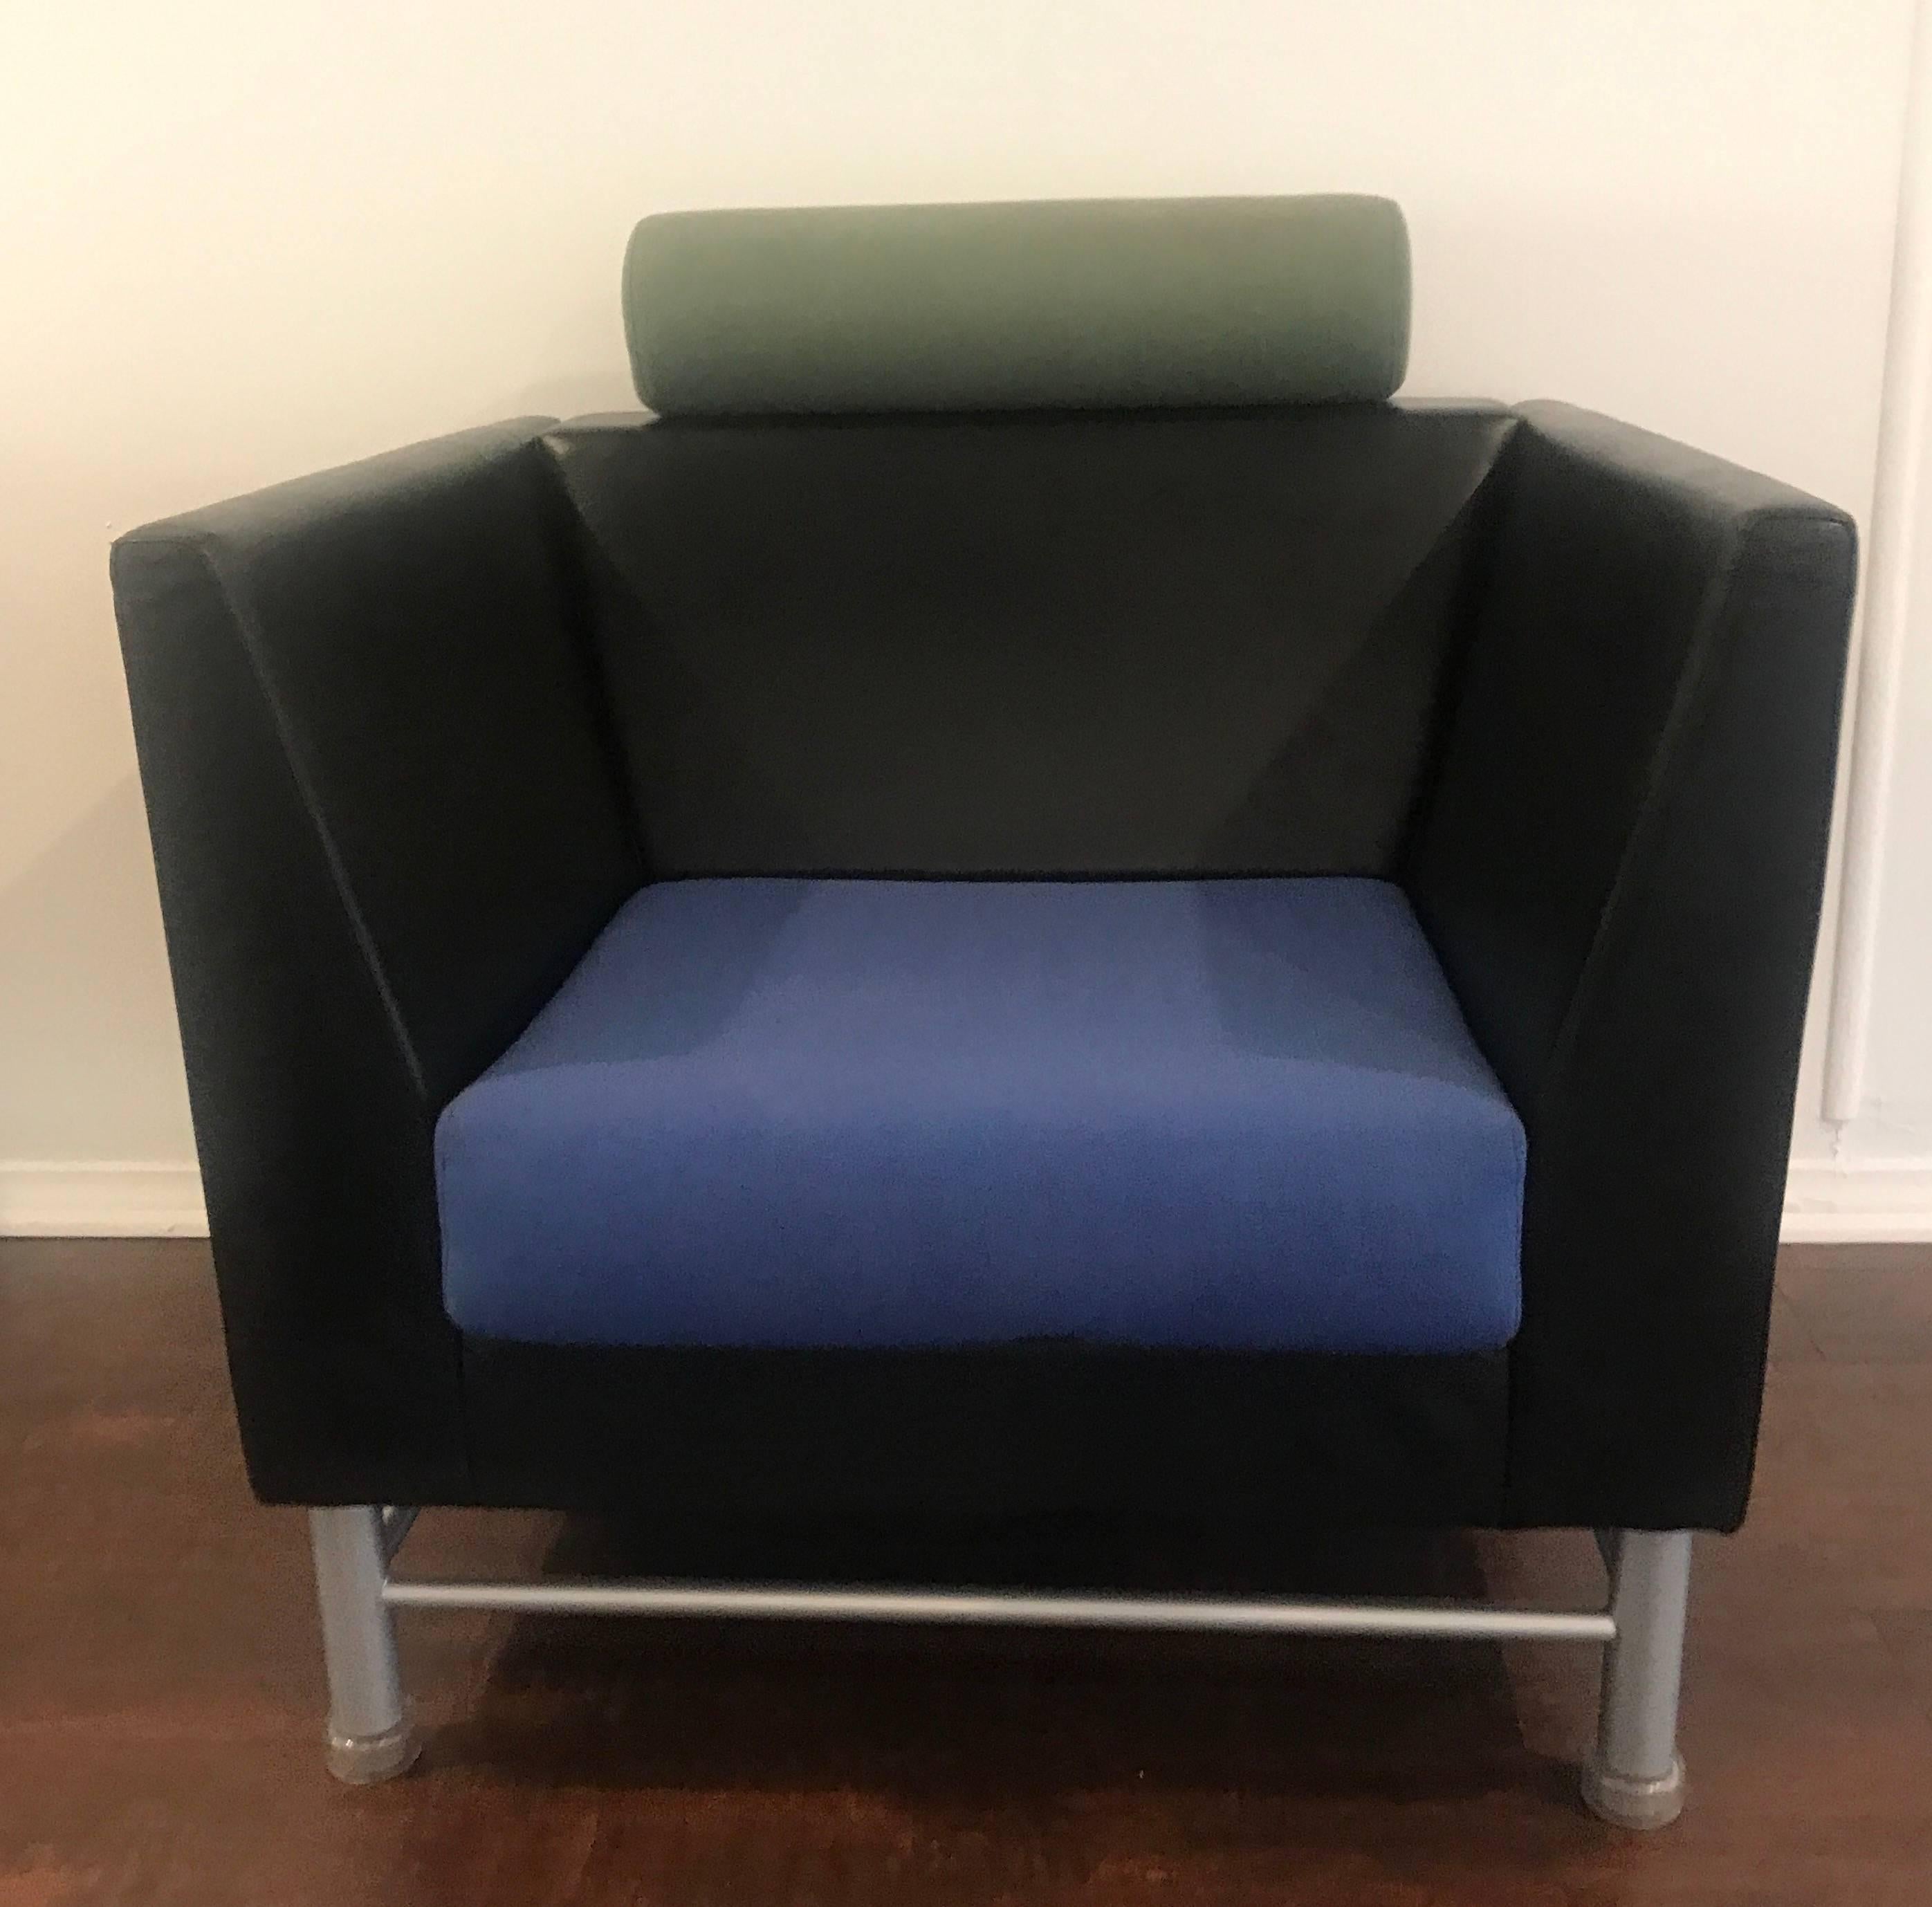 A rare pair of 1980s bold architectural Postmodern chairs designed by the famed Italian architect, Ettore Sottsass for Knoll. The comfortable cube chairs are in black leather with blue cotton seats and green cylinder head rests on grey enameled